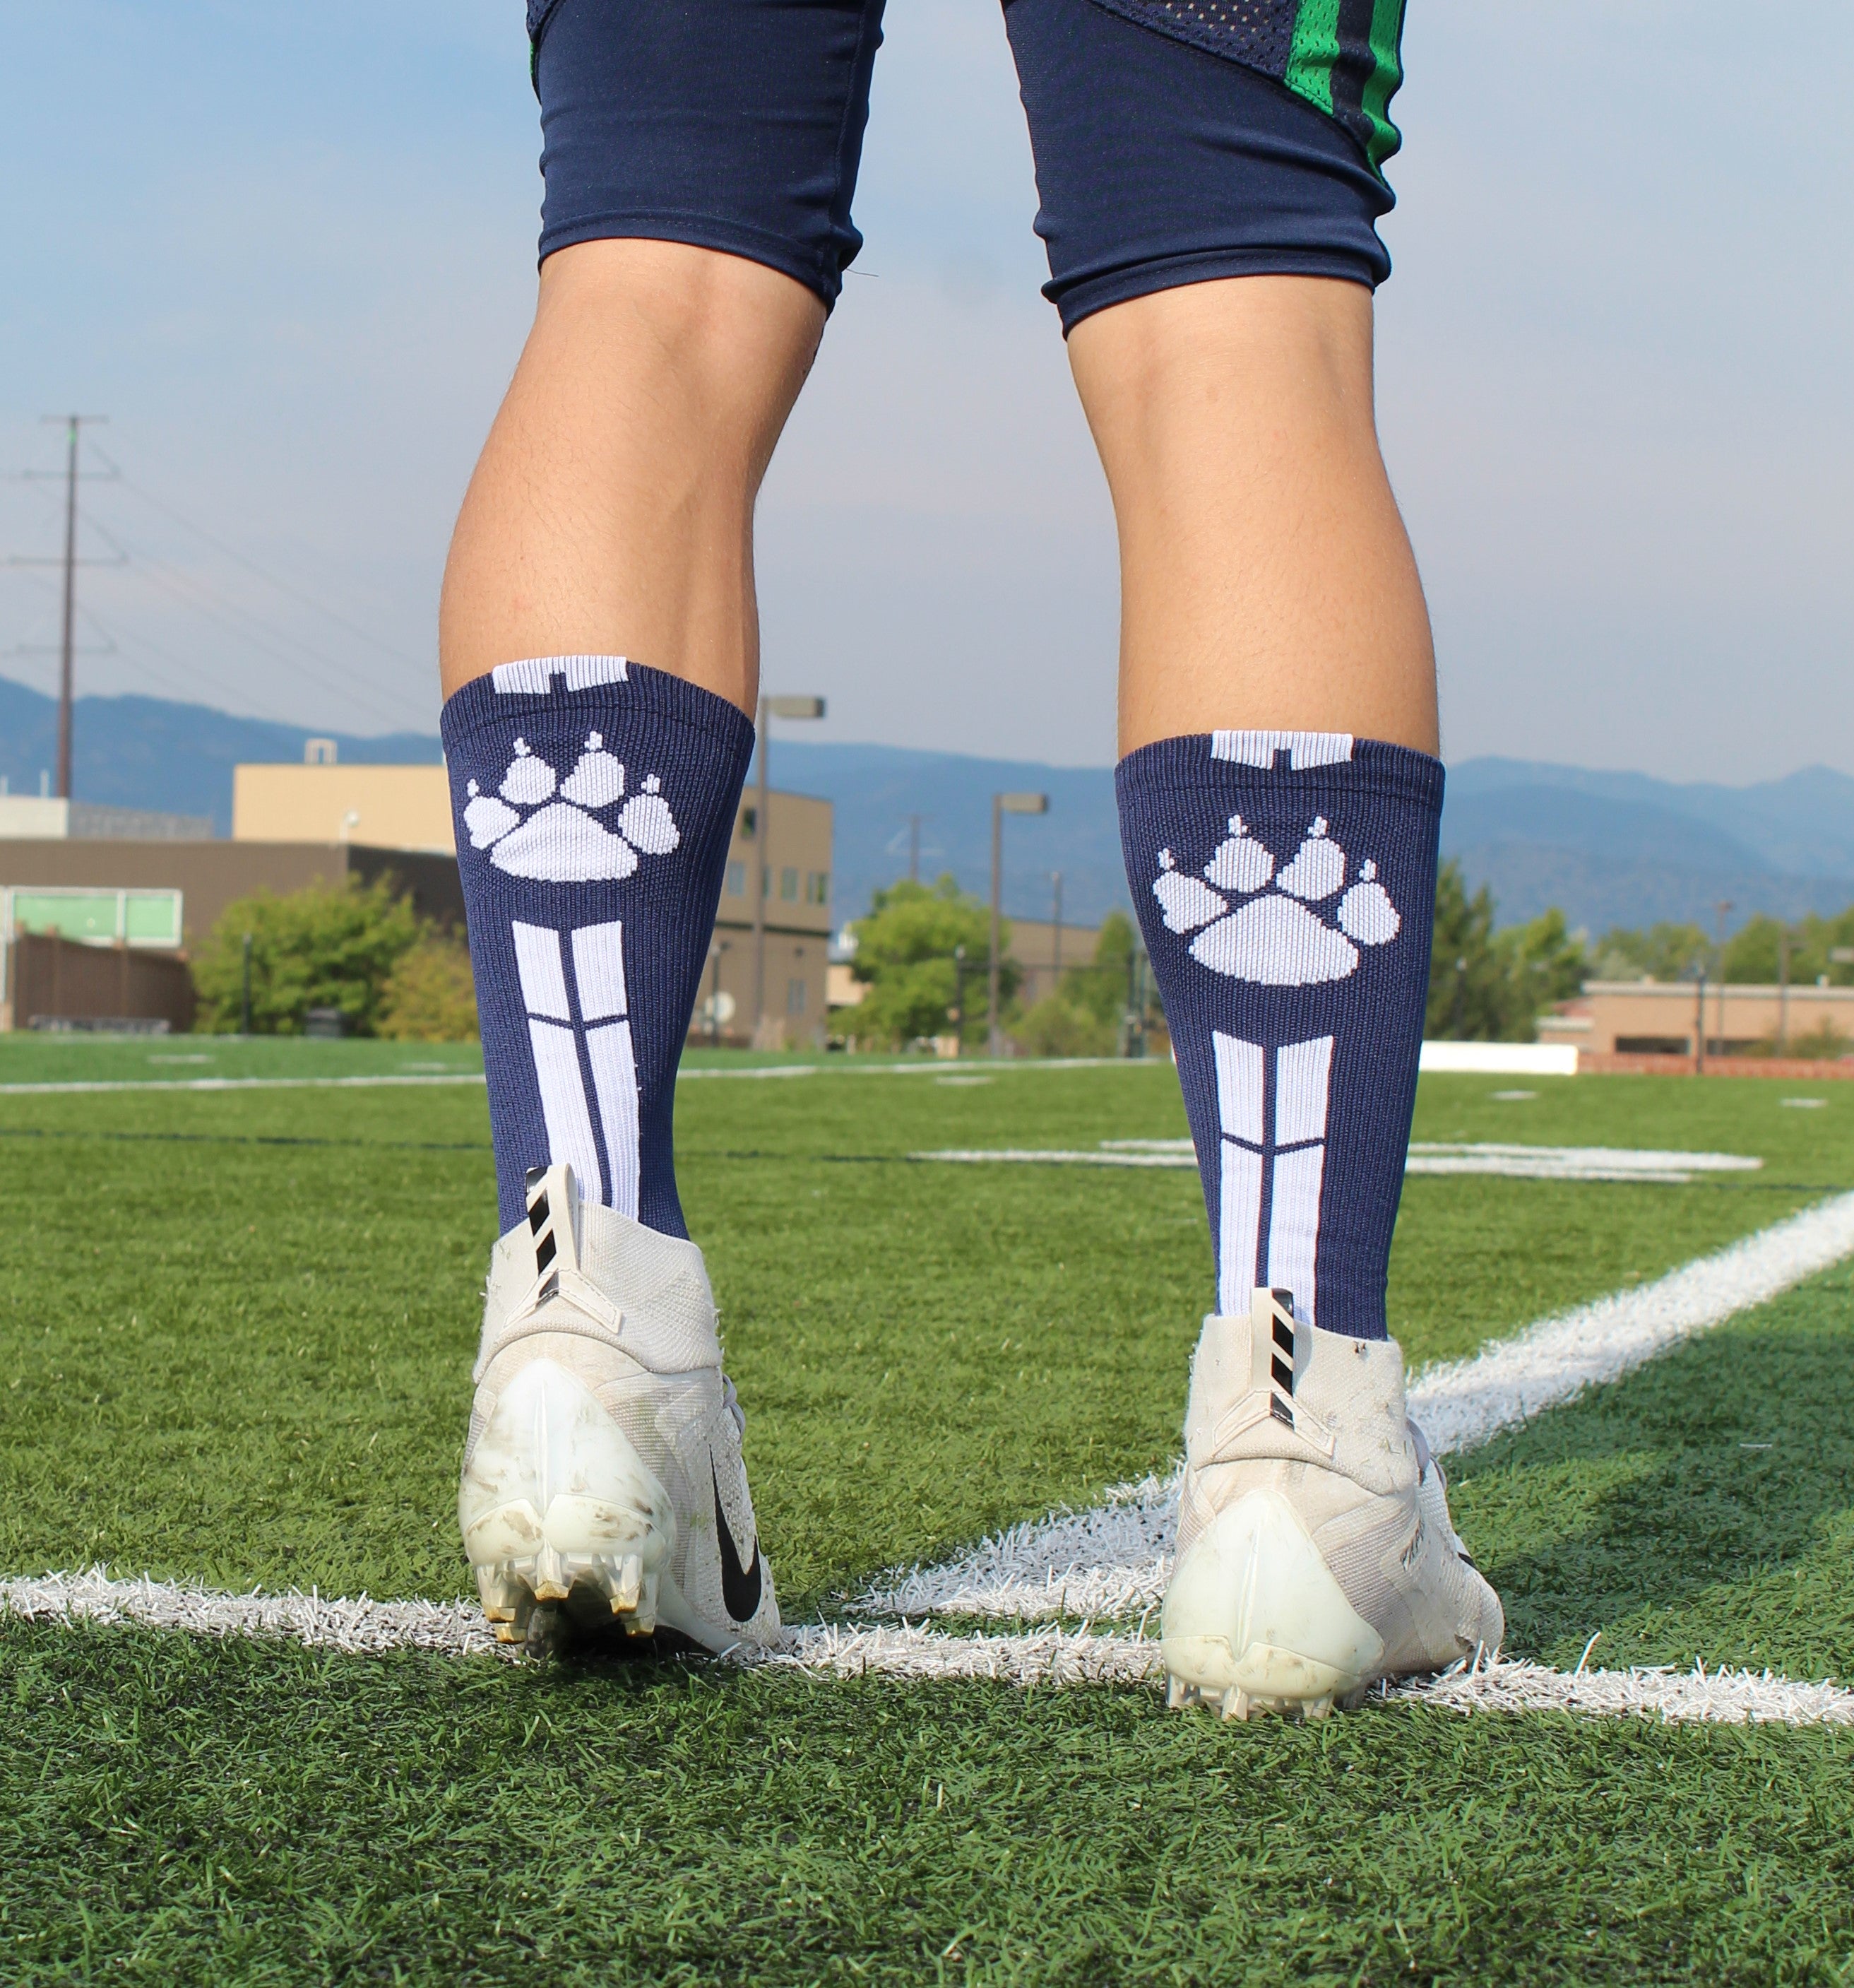 3 Best Football Socks for Affordability and Comfort